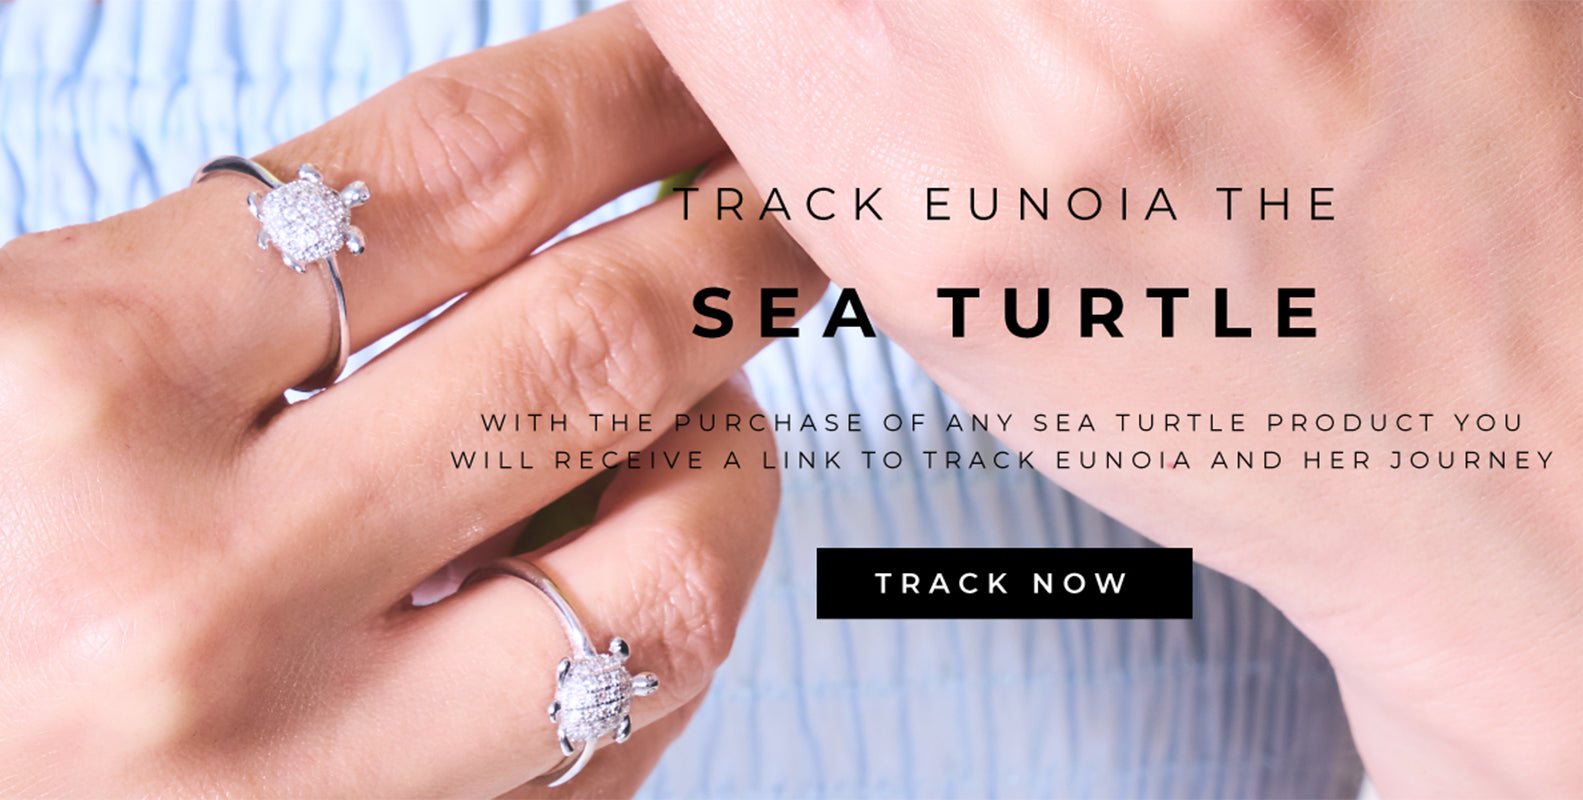 Track our Sea Turtle Eunoia with our Handmade Sea Turtle Jewelry Collection